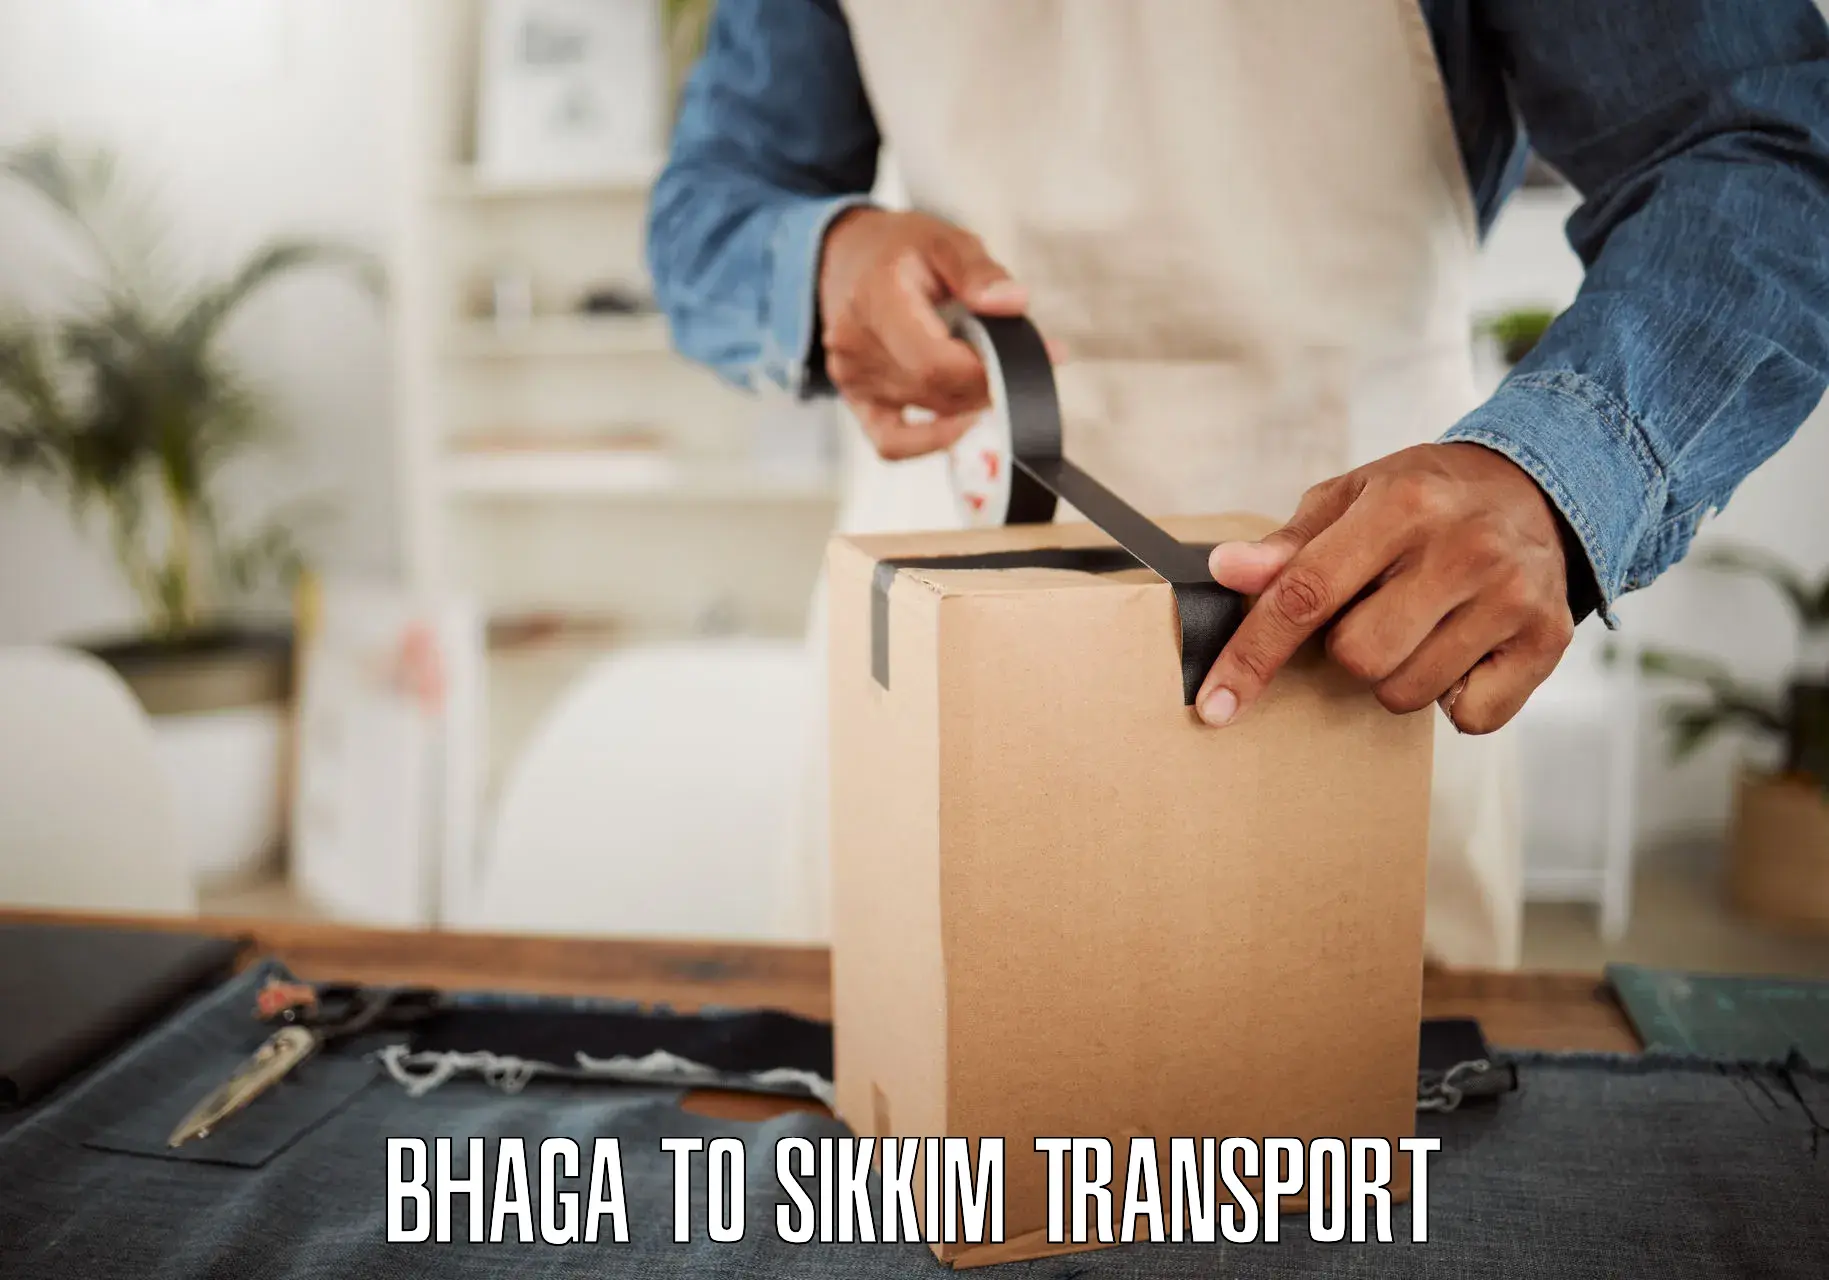 Vehicle transport services Bhaga to Pelling